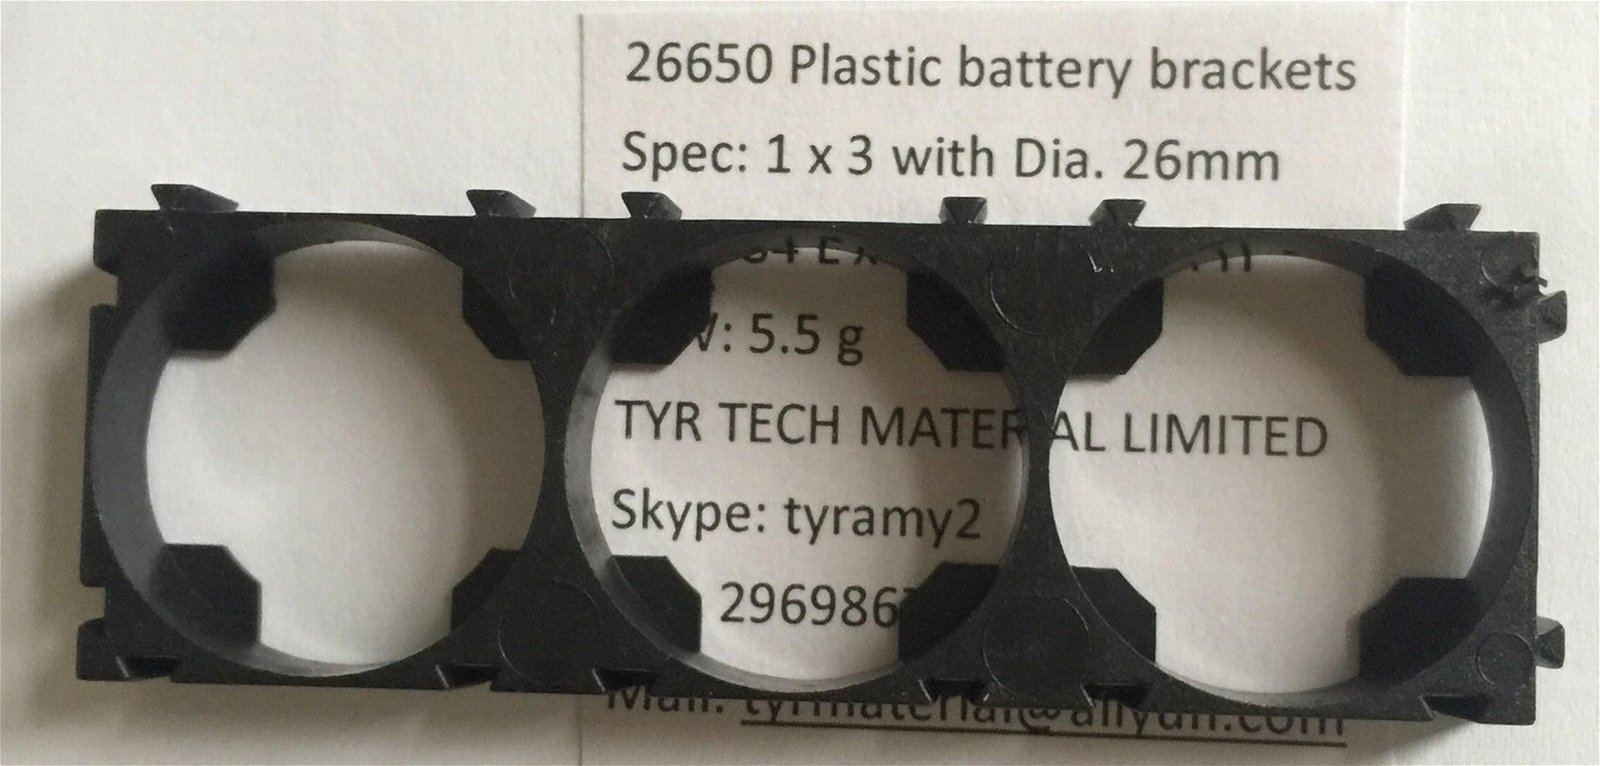 26650 lithium battery bracket use in battery pack or battery holder 1 x 3 3